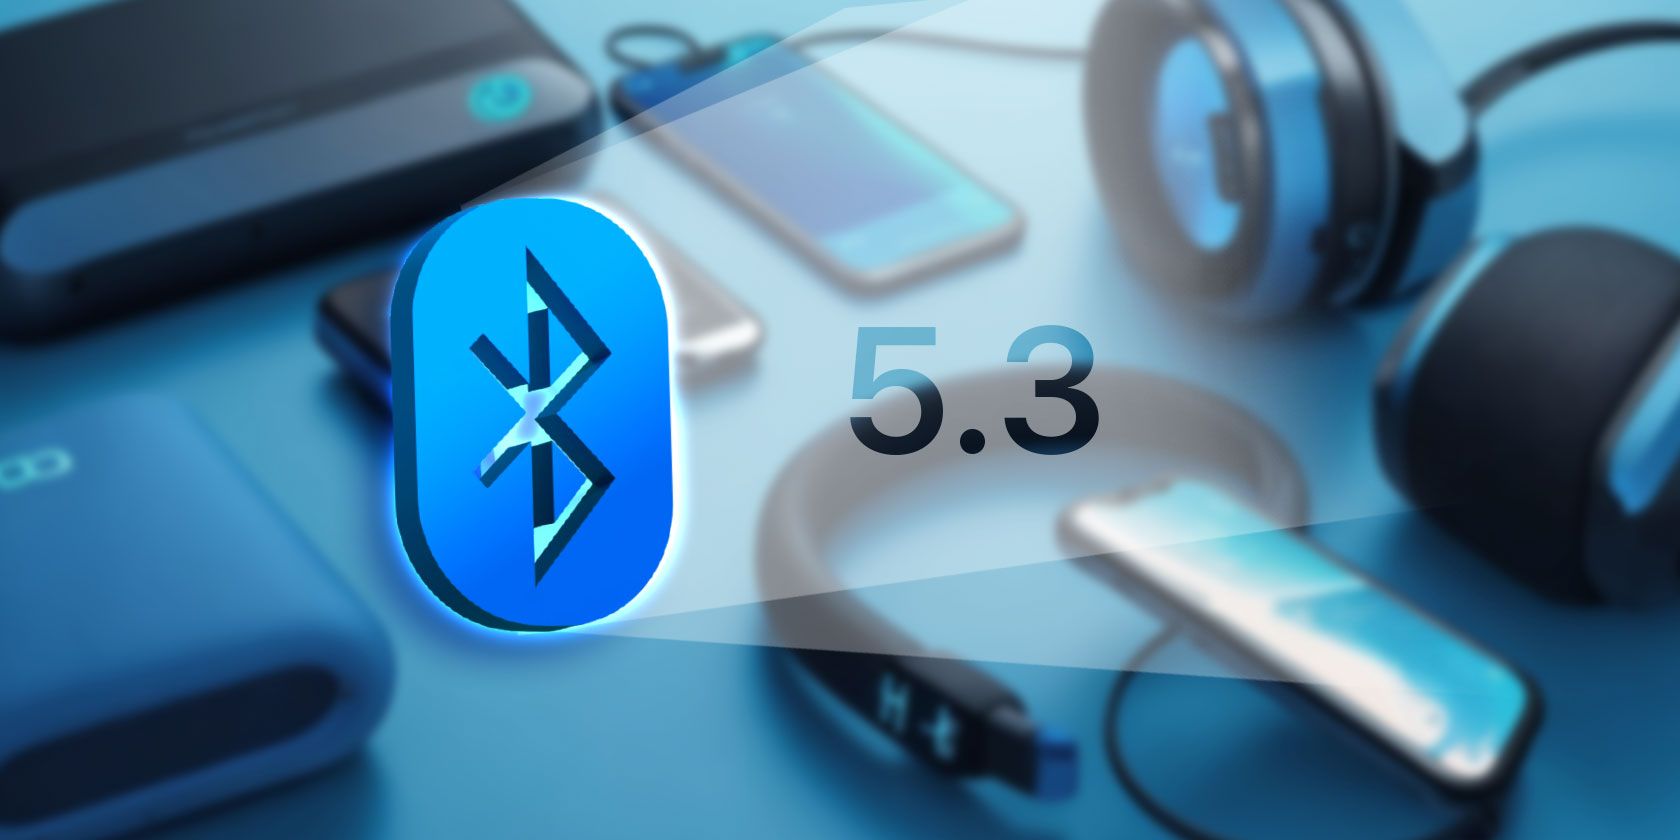 What's New With Bluetooth 5.3 